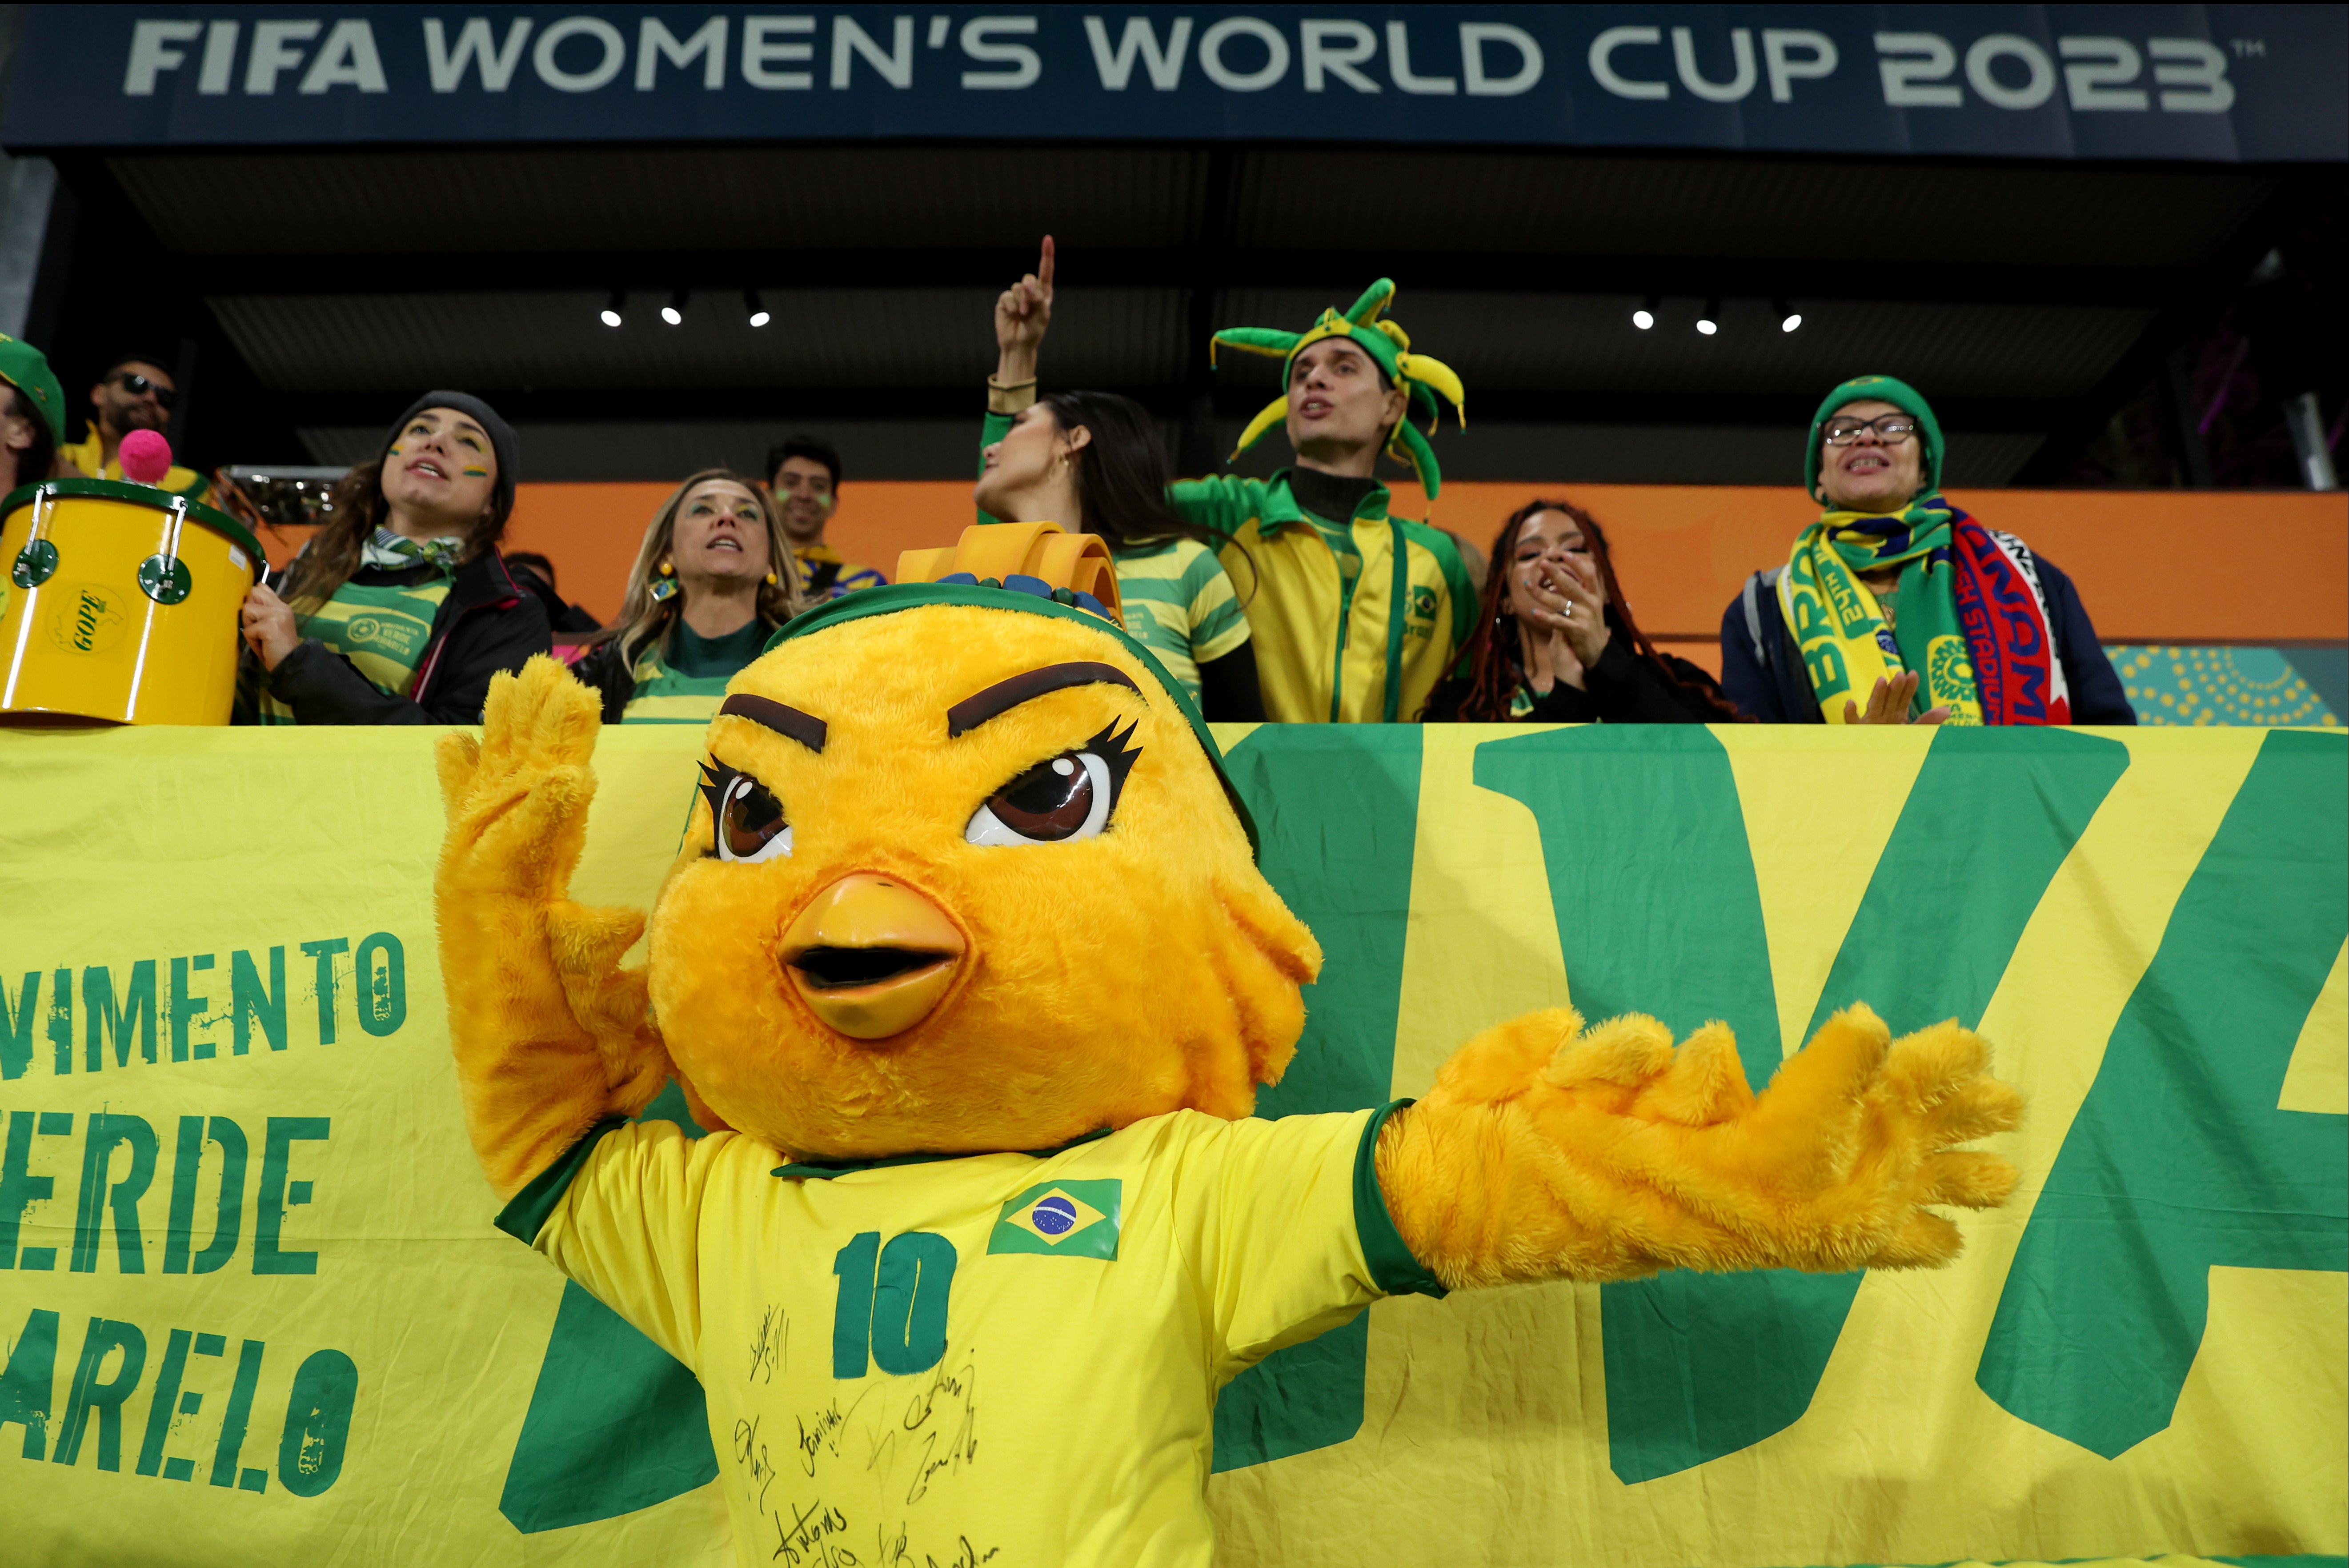 Brazil will host the Women’s World Cup for the first time